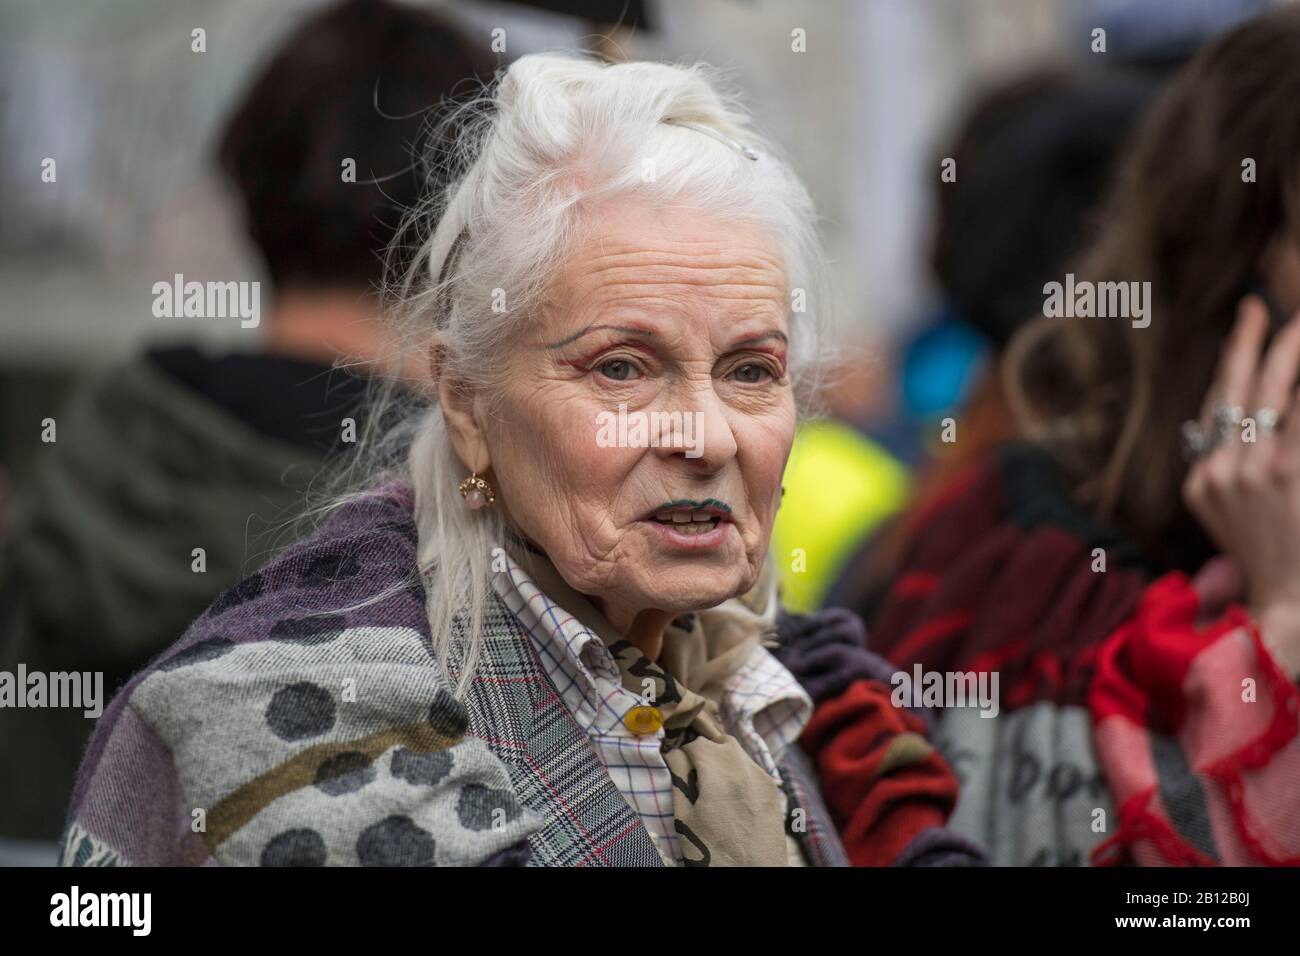 British fashion designer Vivienne Westwood attending a rally to oppose extradition to the United States of Julian Assange who is in Belmarsh prison. The march was from Australia House to Parliament Square in London, UK Stock Photo